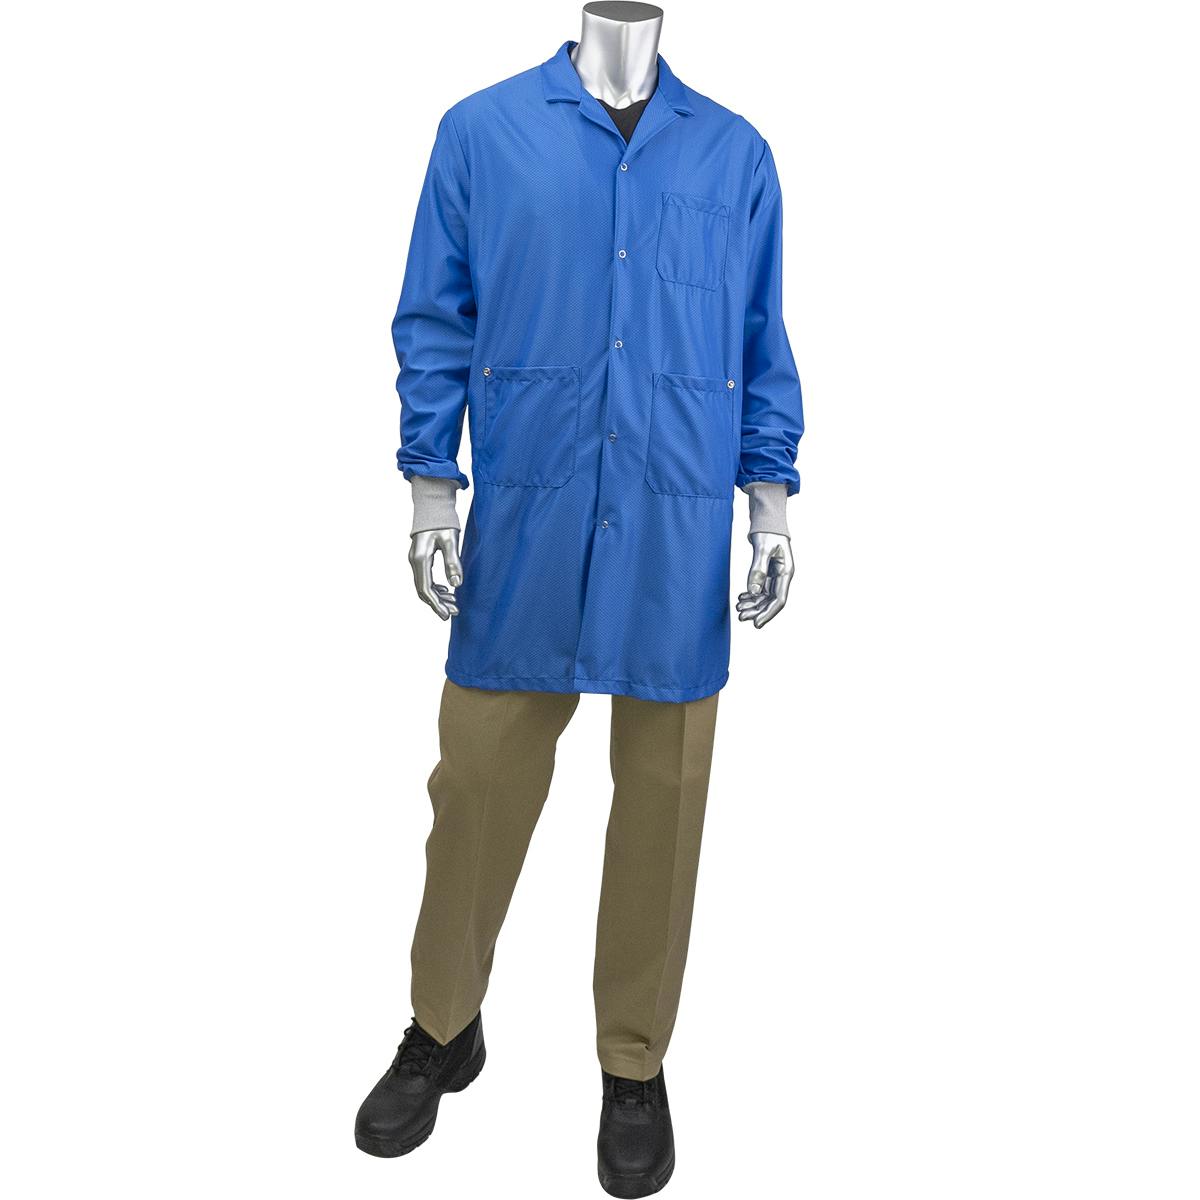 StatMaster Long ESD Labcoat - ESD Knit Cuff, Royal (BR51C-47RB)